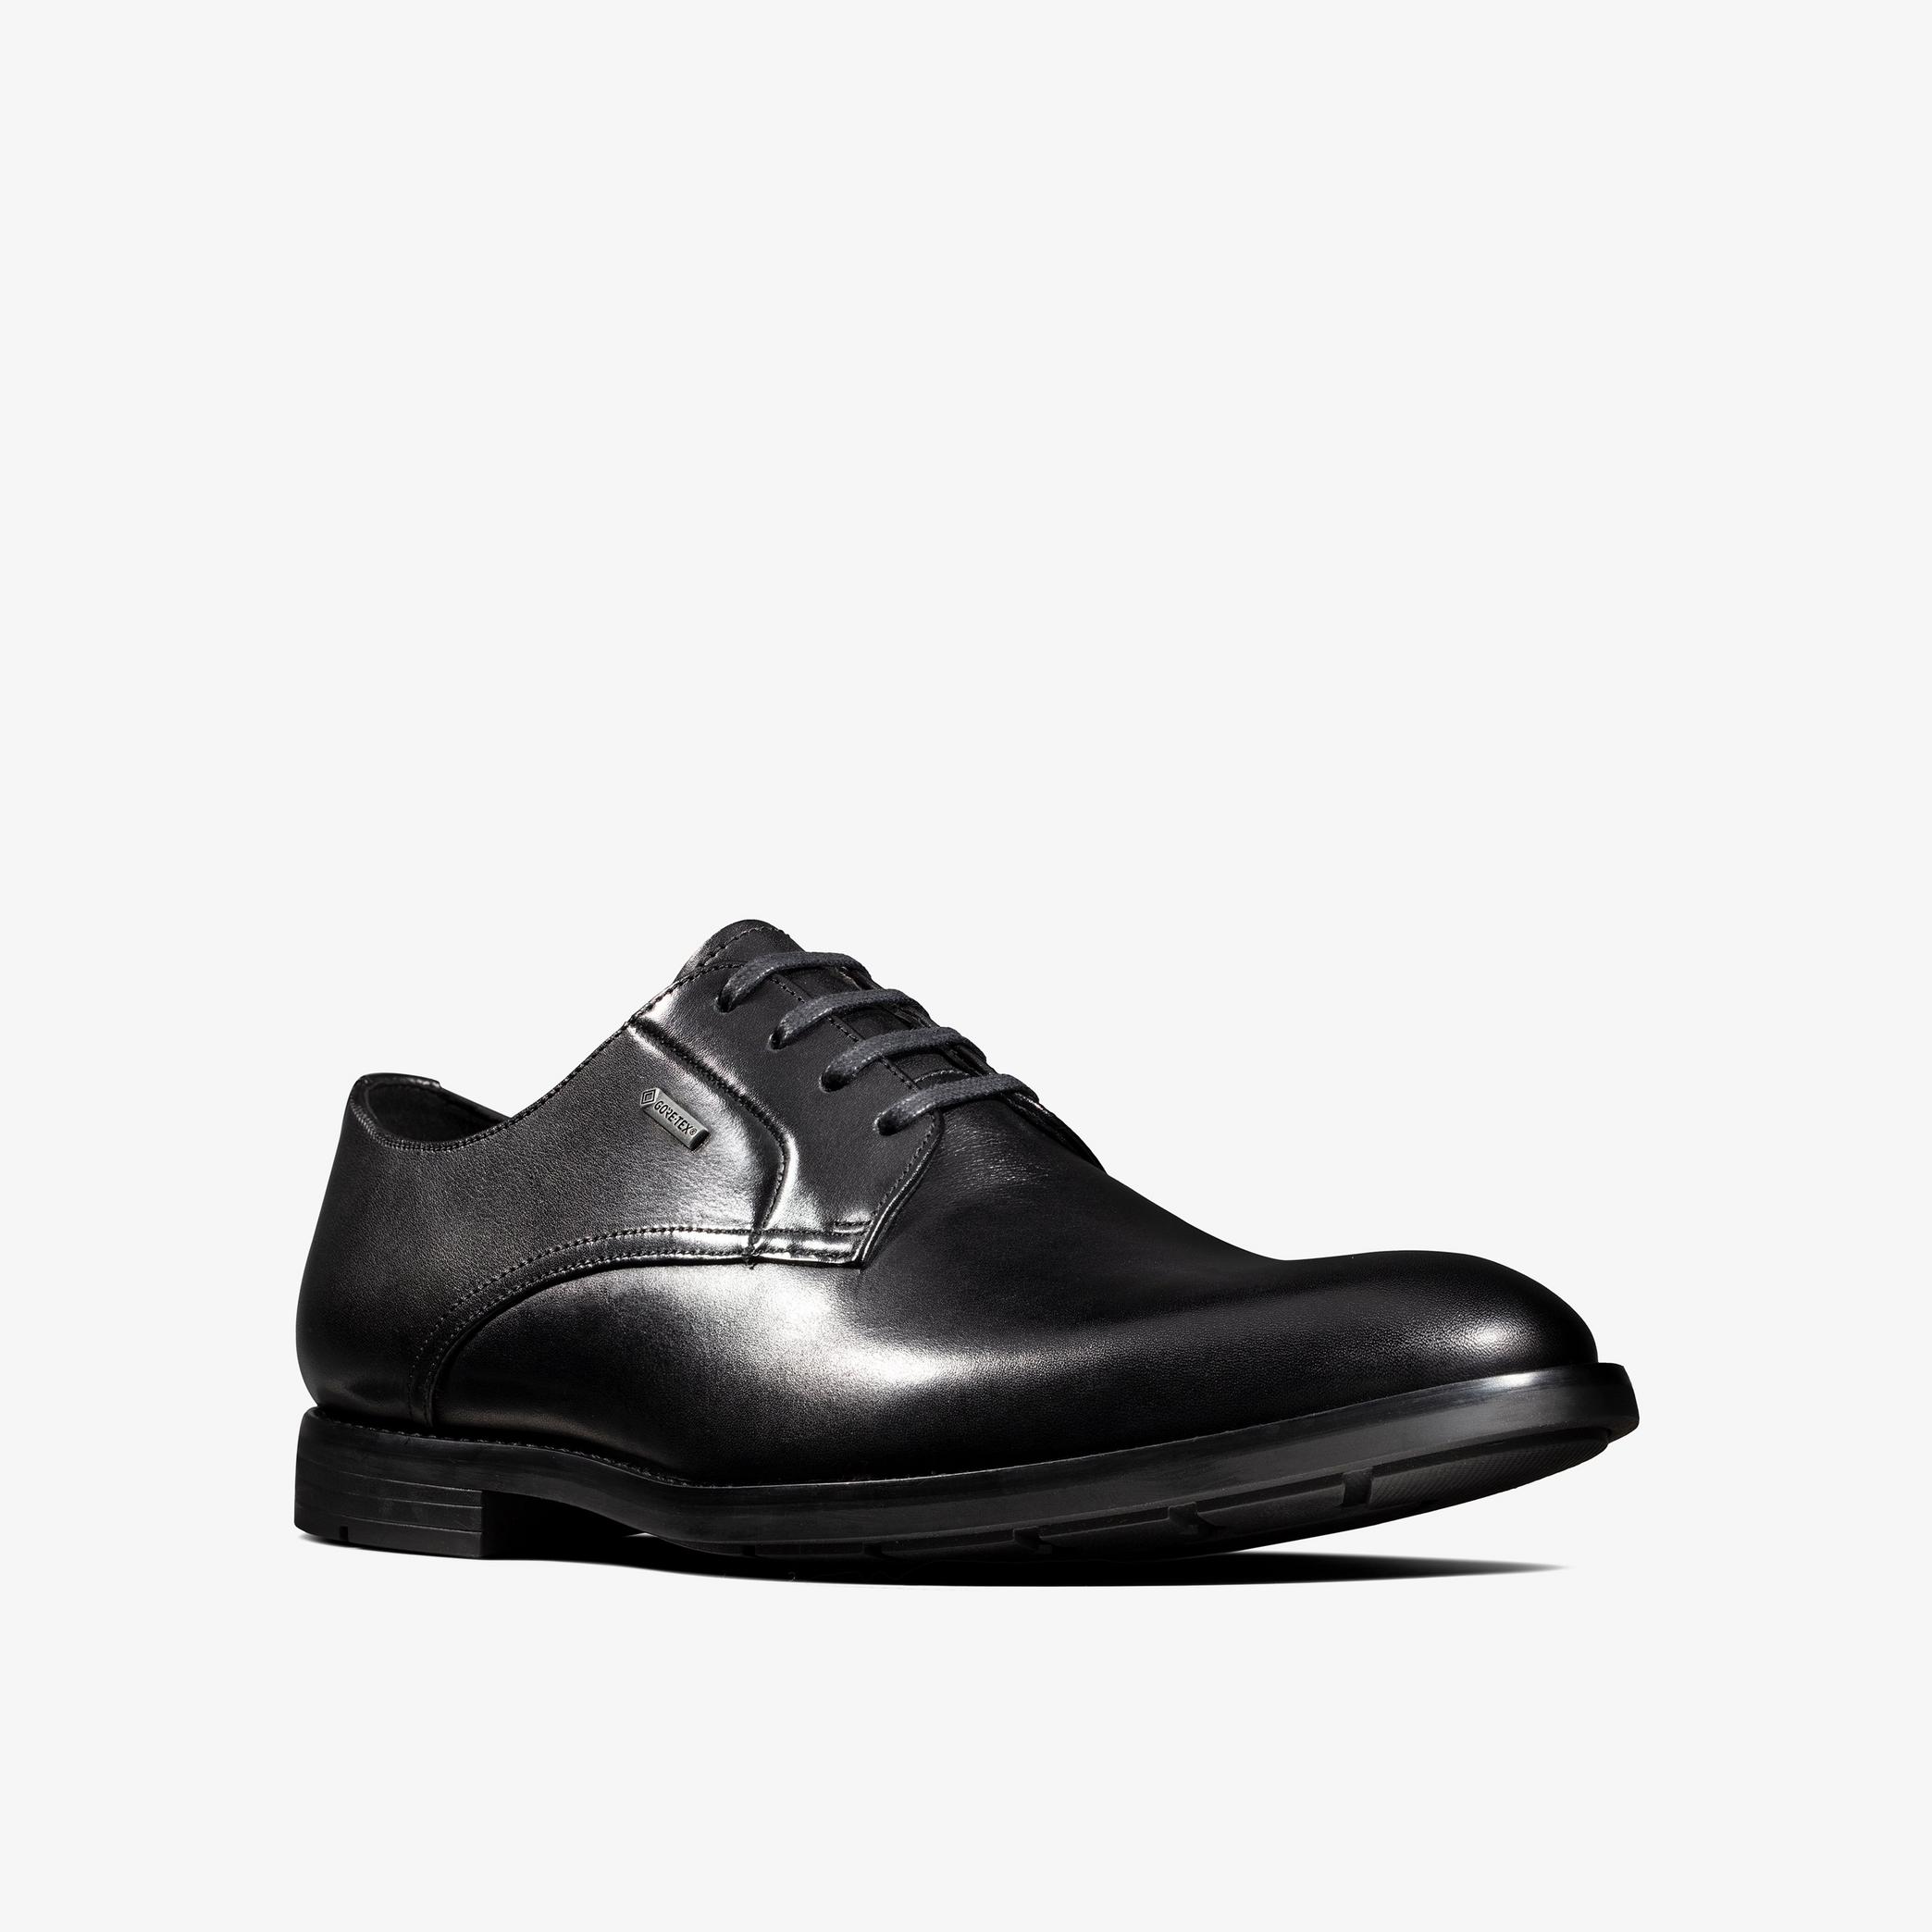 Ronnie Walk GTX Black Leather Derby Shoes, view 3 of 6